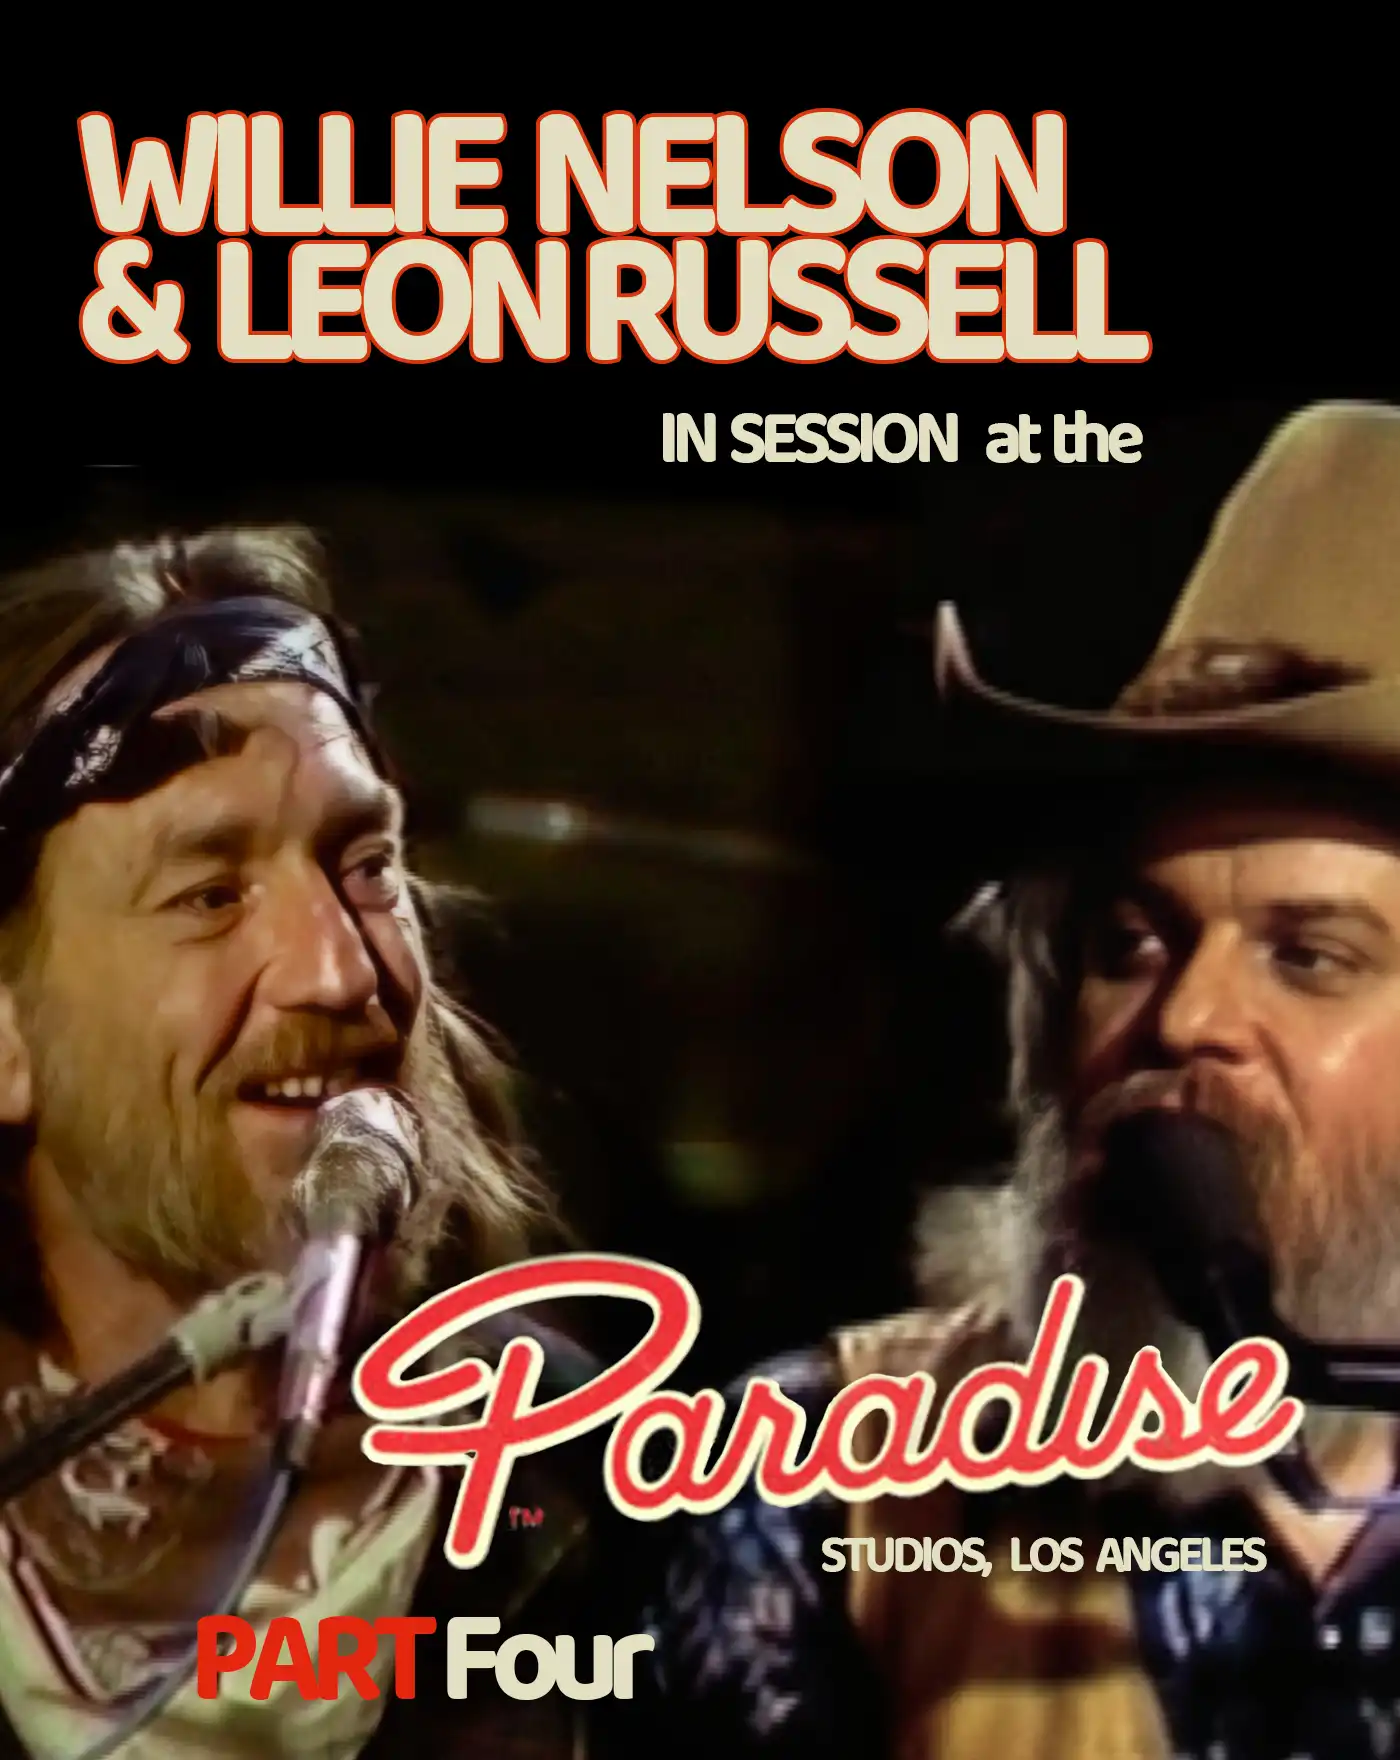 Leon Russell & Willie Nelson Part Four